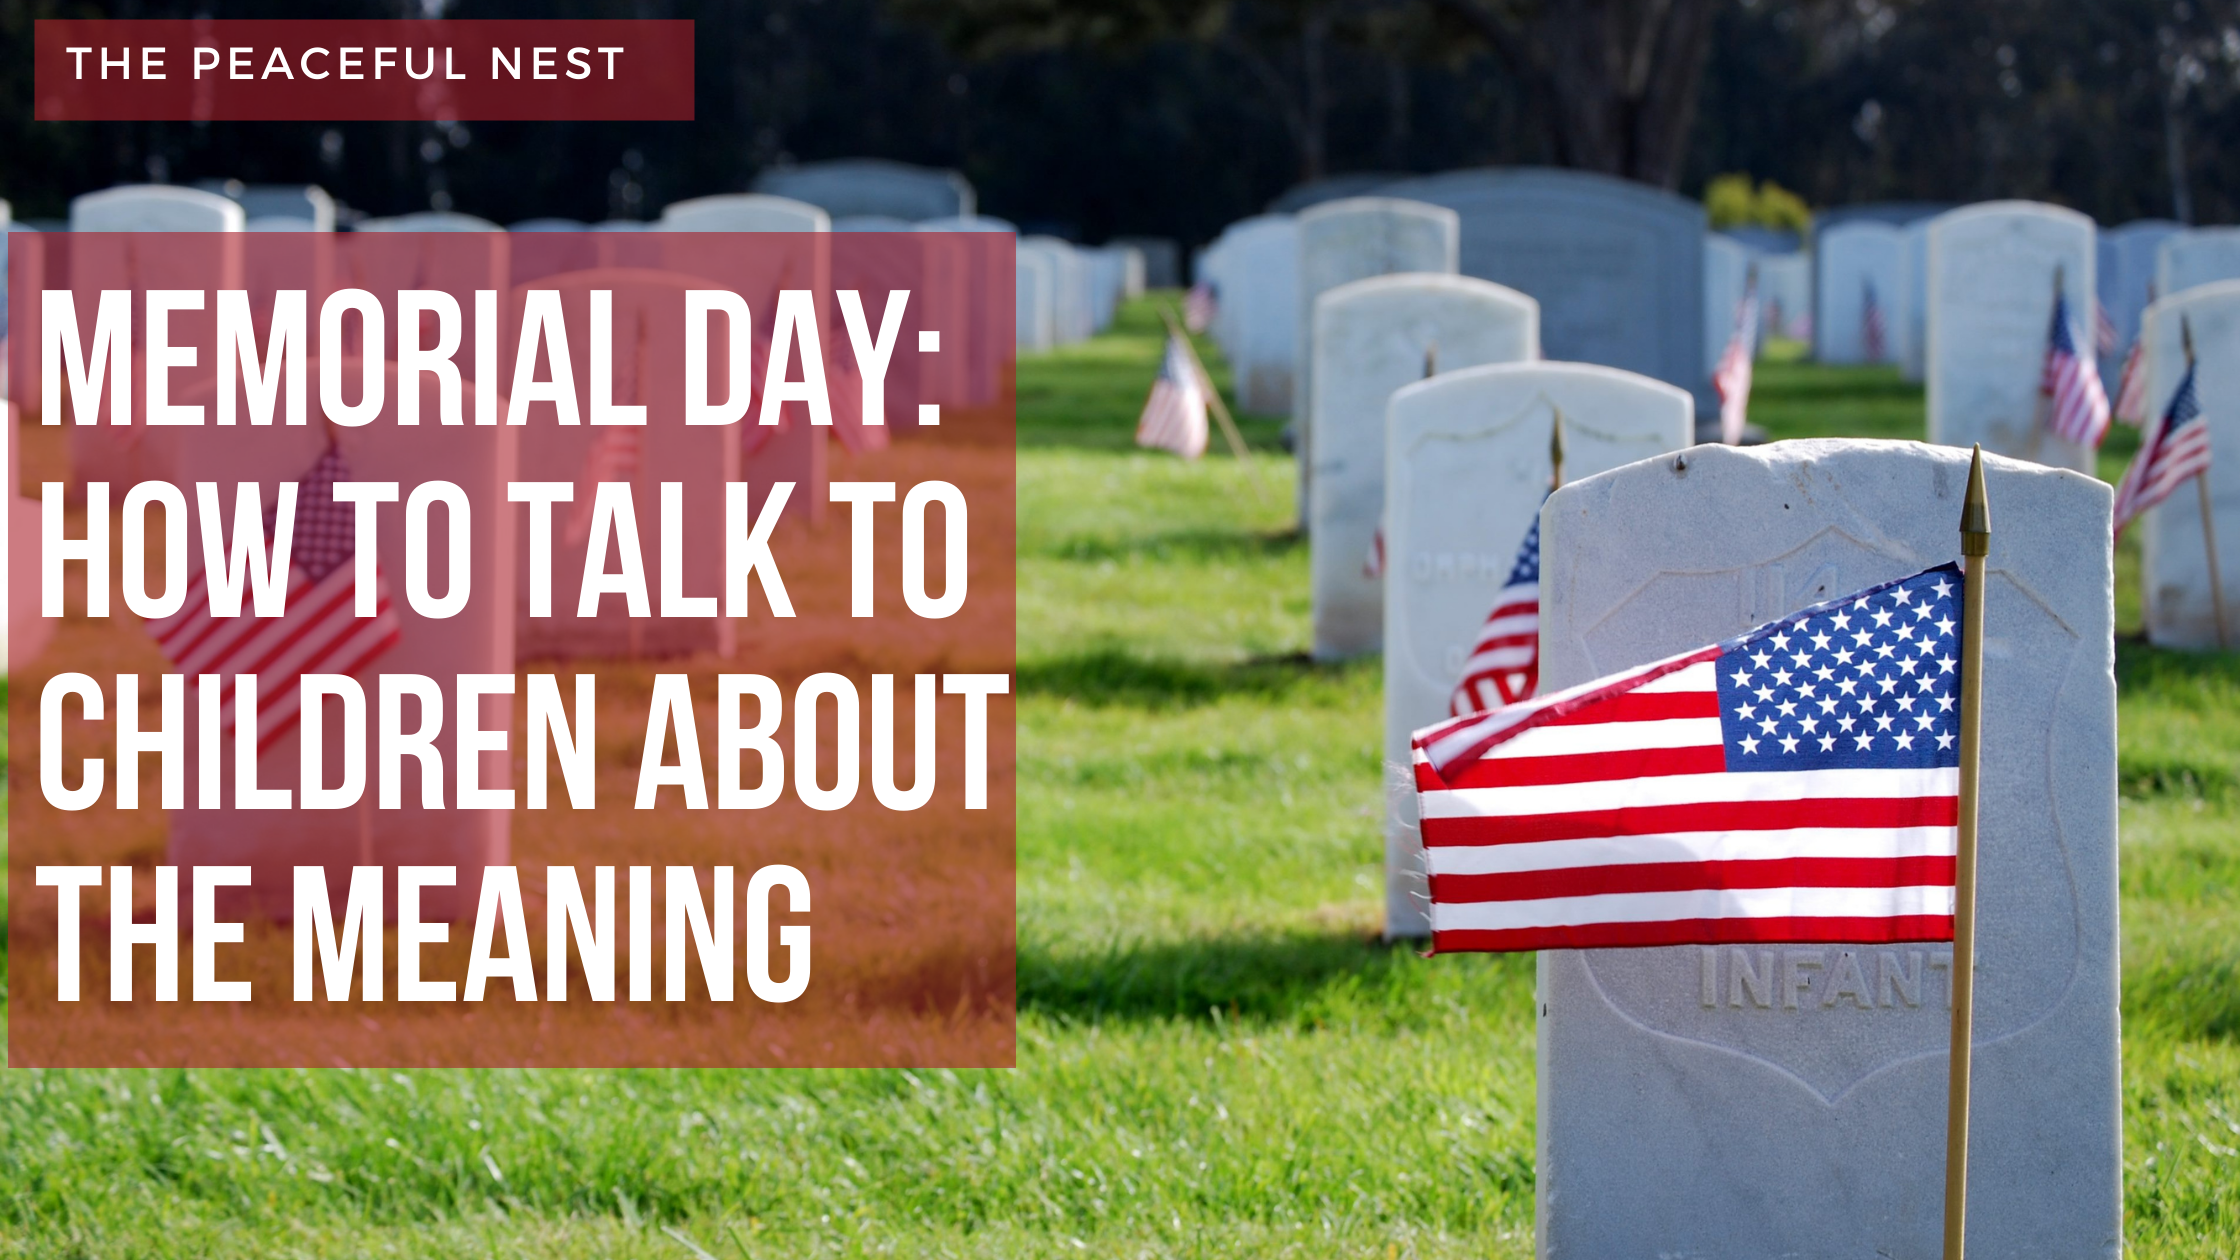 Memorial Day: How to Talk to Children About the Meaning